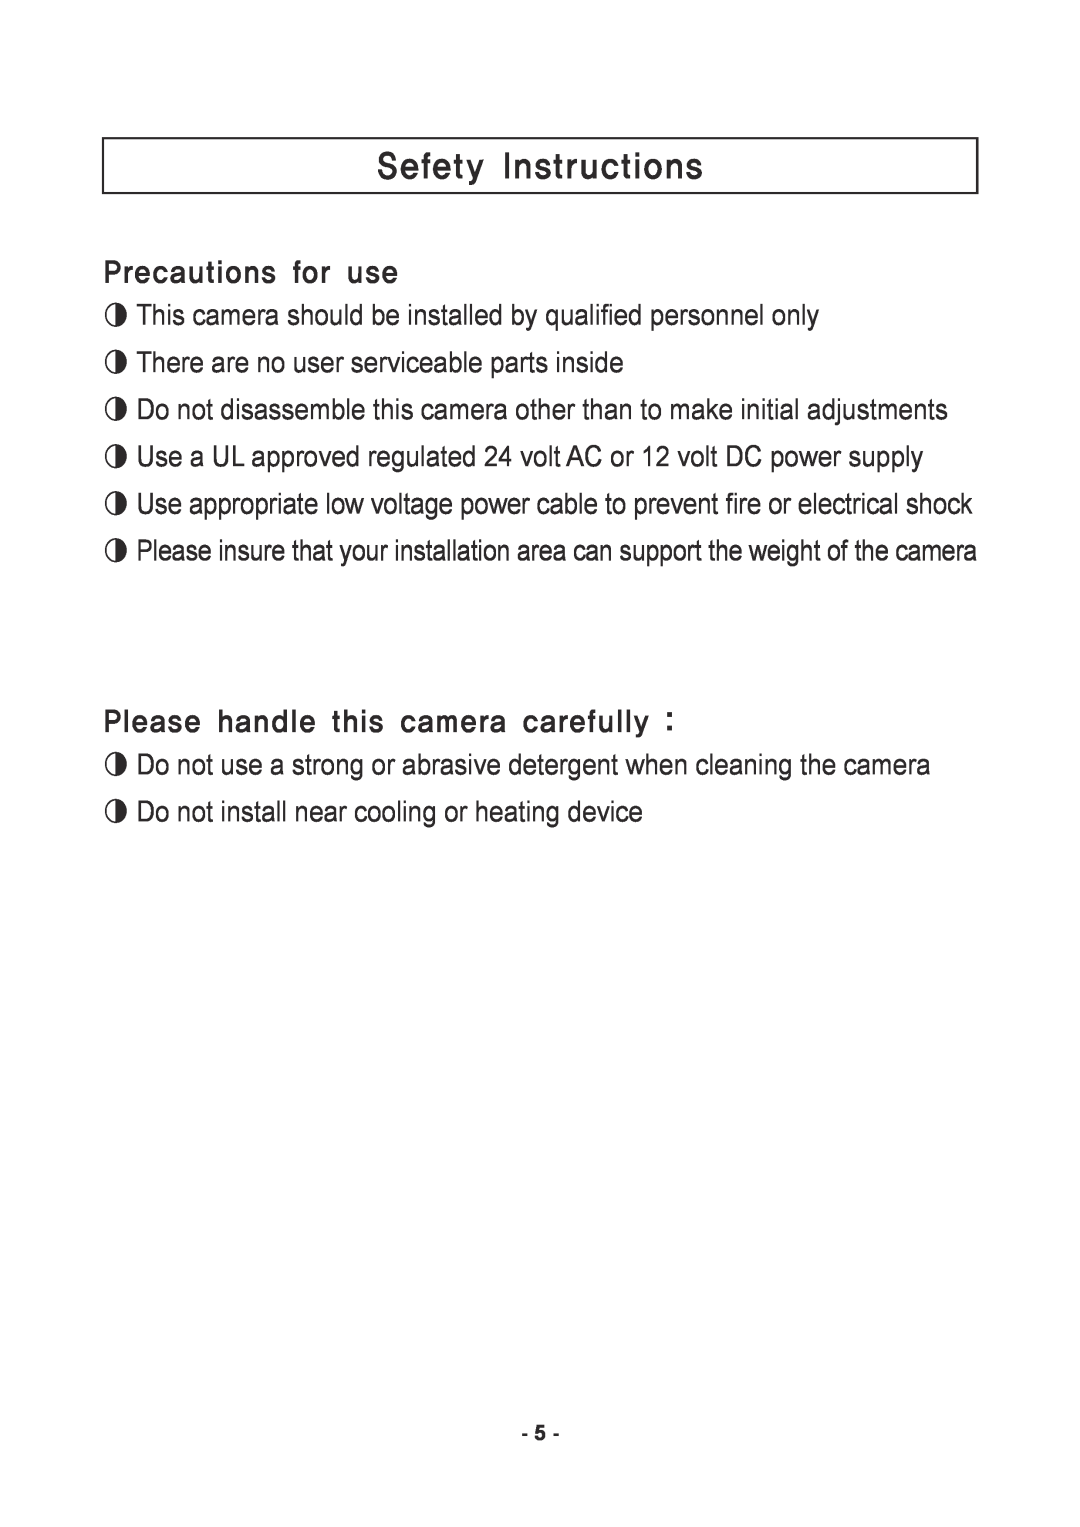 Speco Technologies VL647ILT Sefety Instructions, Precautions for use, Please handle this camera carefully 